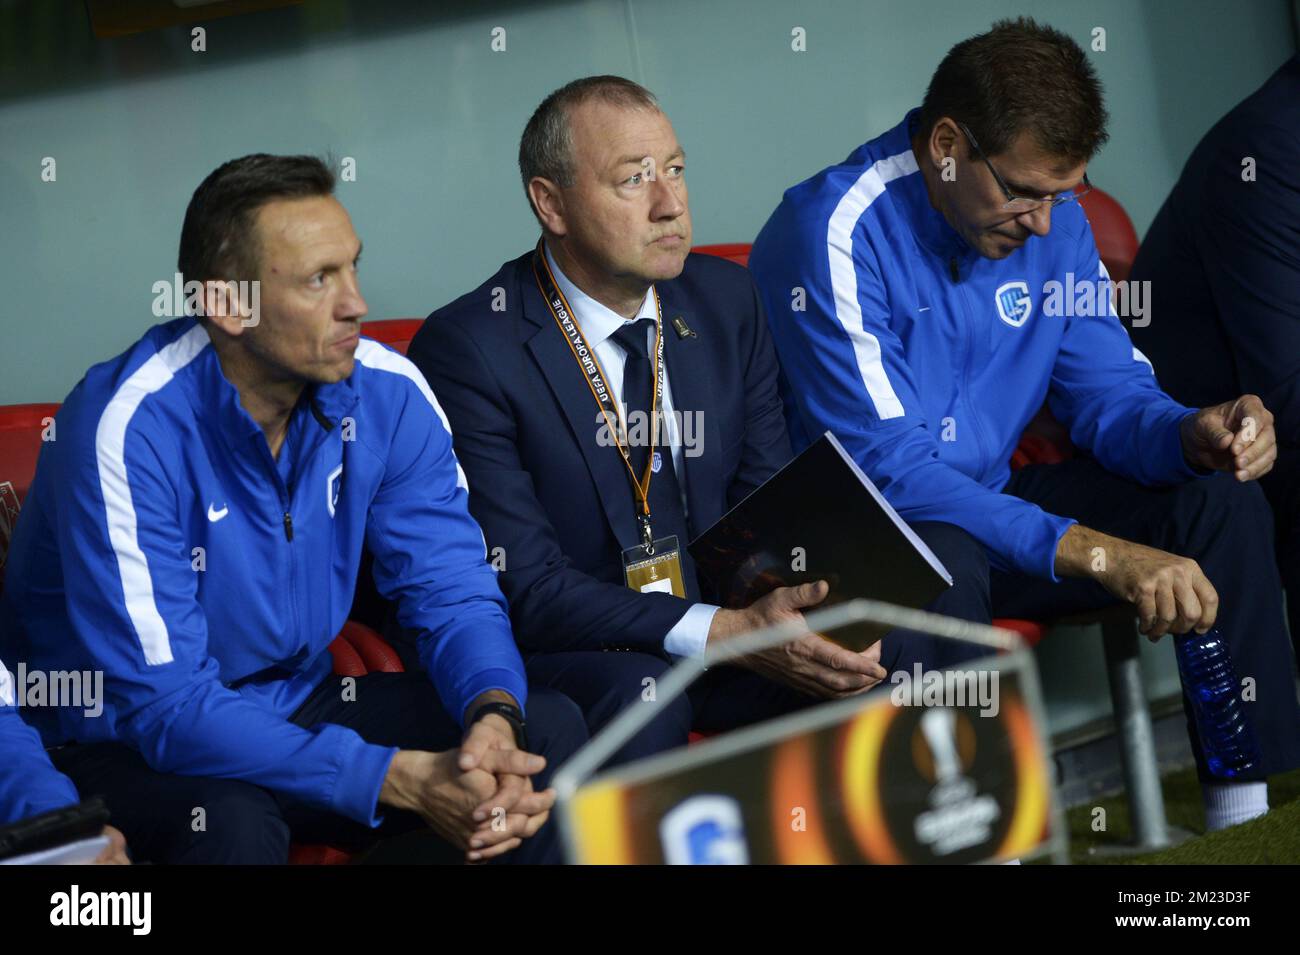 Genk's goalkeeper coach Erwin Lemmens, Genk's assistant coach Pierre Denier and Genk's assistant coach Rudy Cossey pictured during a soccer game between Spanish Club Athletic Bilbao and Belgian team KRC Genk in Bilbao, Spain, Thursday 03 November 2016, the fourth game of the group stage of the Europa League competition in Group F. BELGA PHOTO YORICK JANSENS Stock Photo